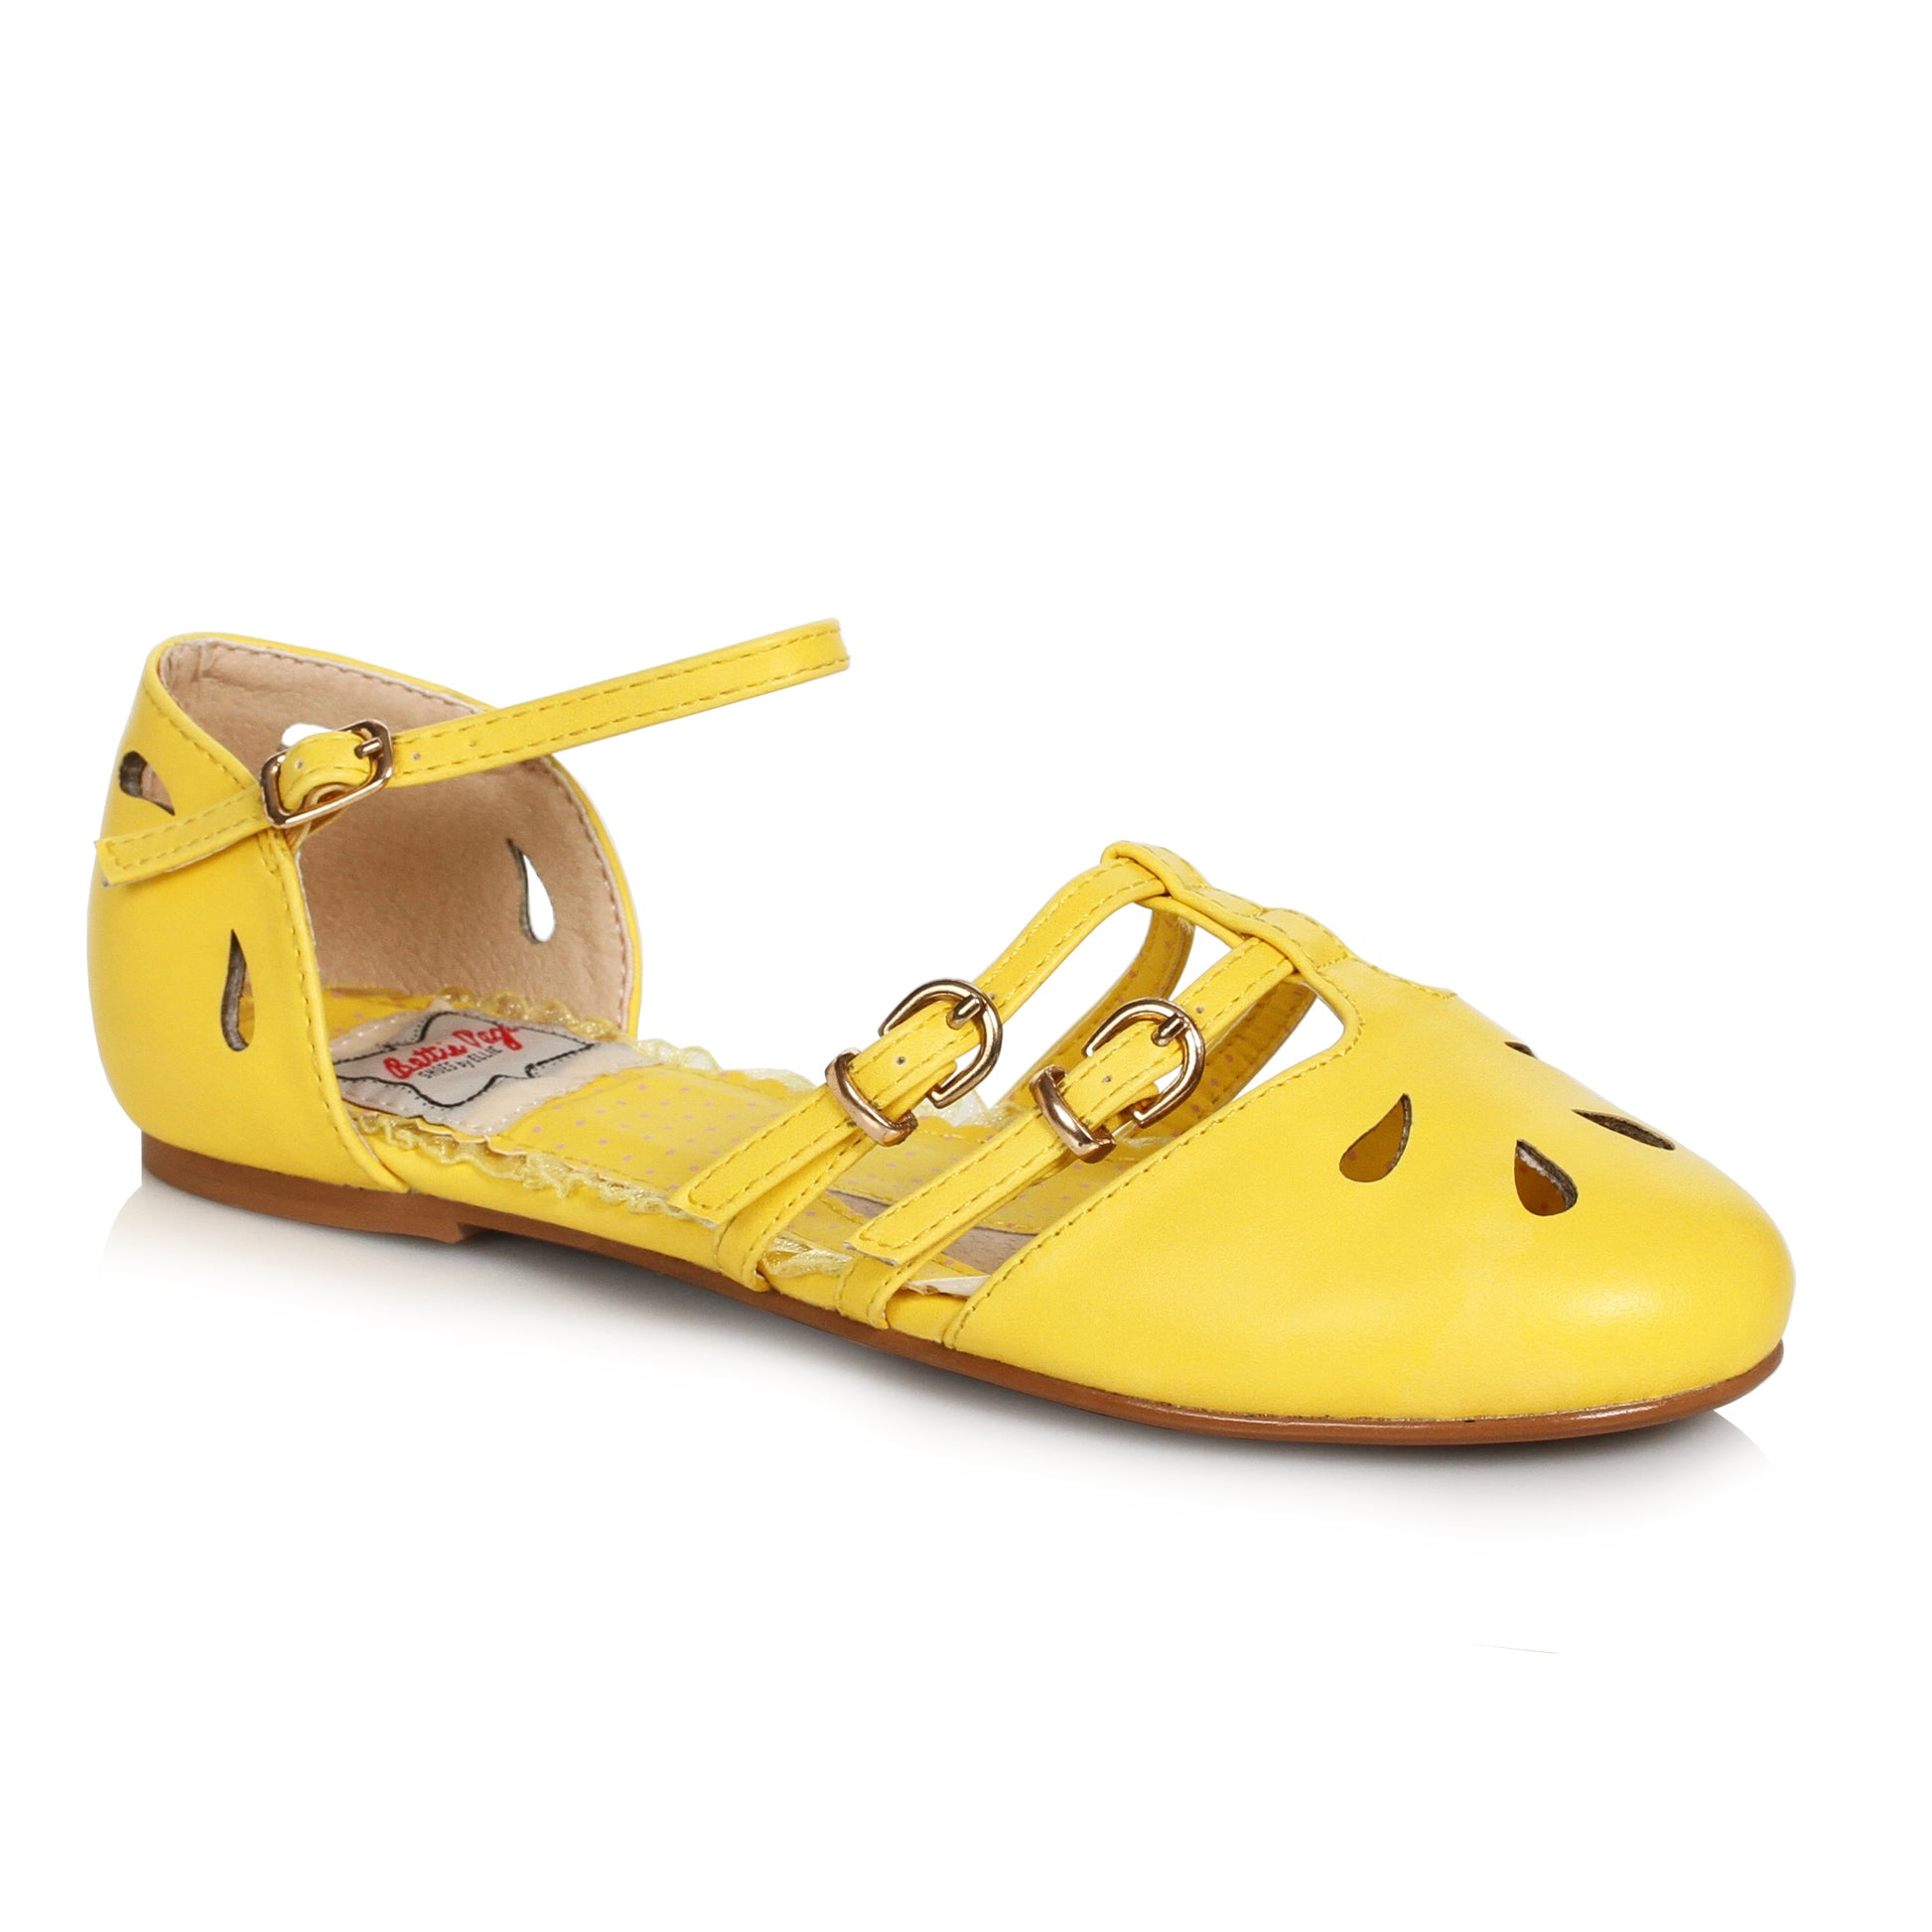 BP100-POLLY Bettie Page Closed Toe Flat with Cutout Décor & Buckle Closure FLATS